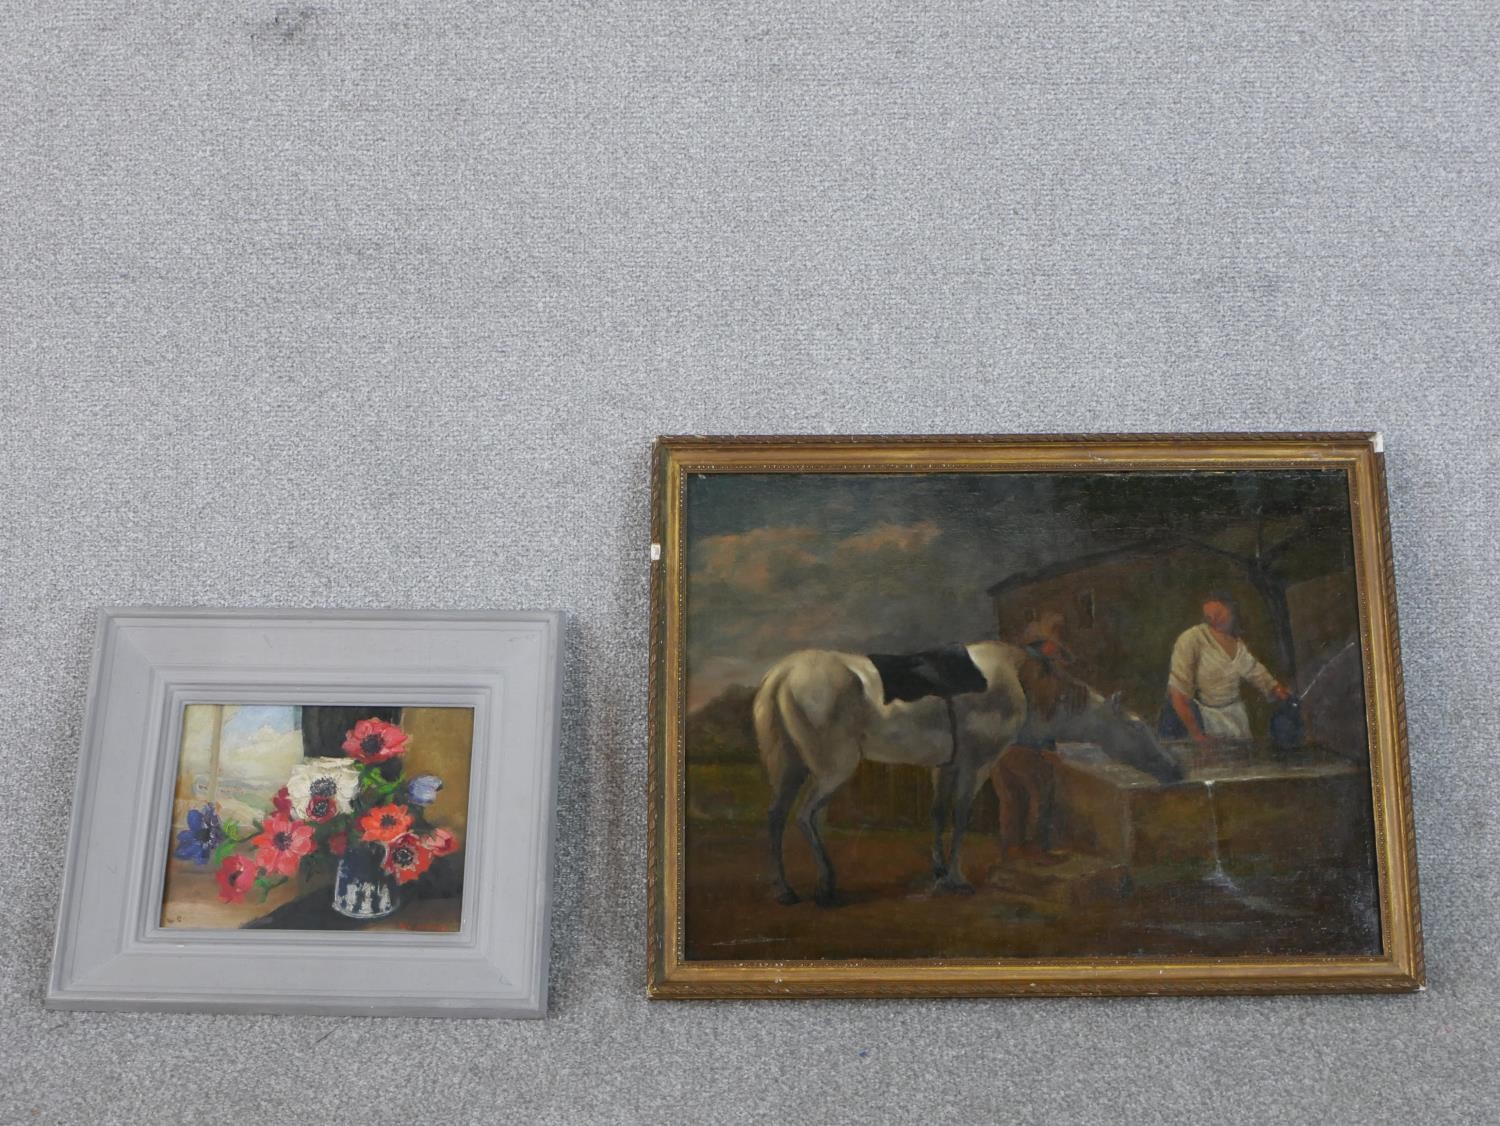 Two framed oils on canvas, one of a vase of flowers, unsigned and an 18th century oil on canvas of a